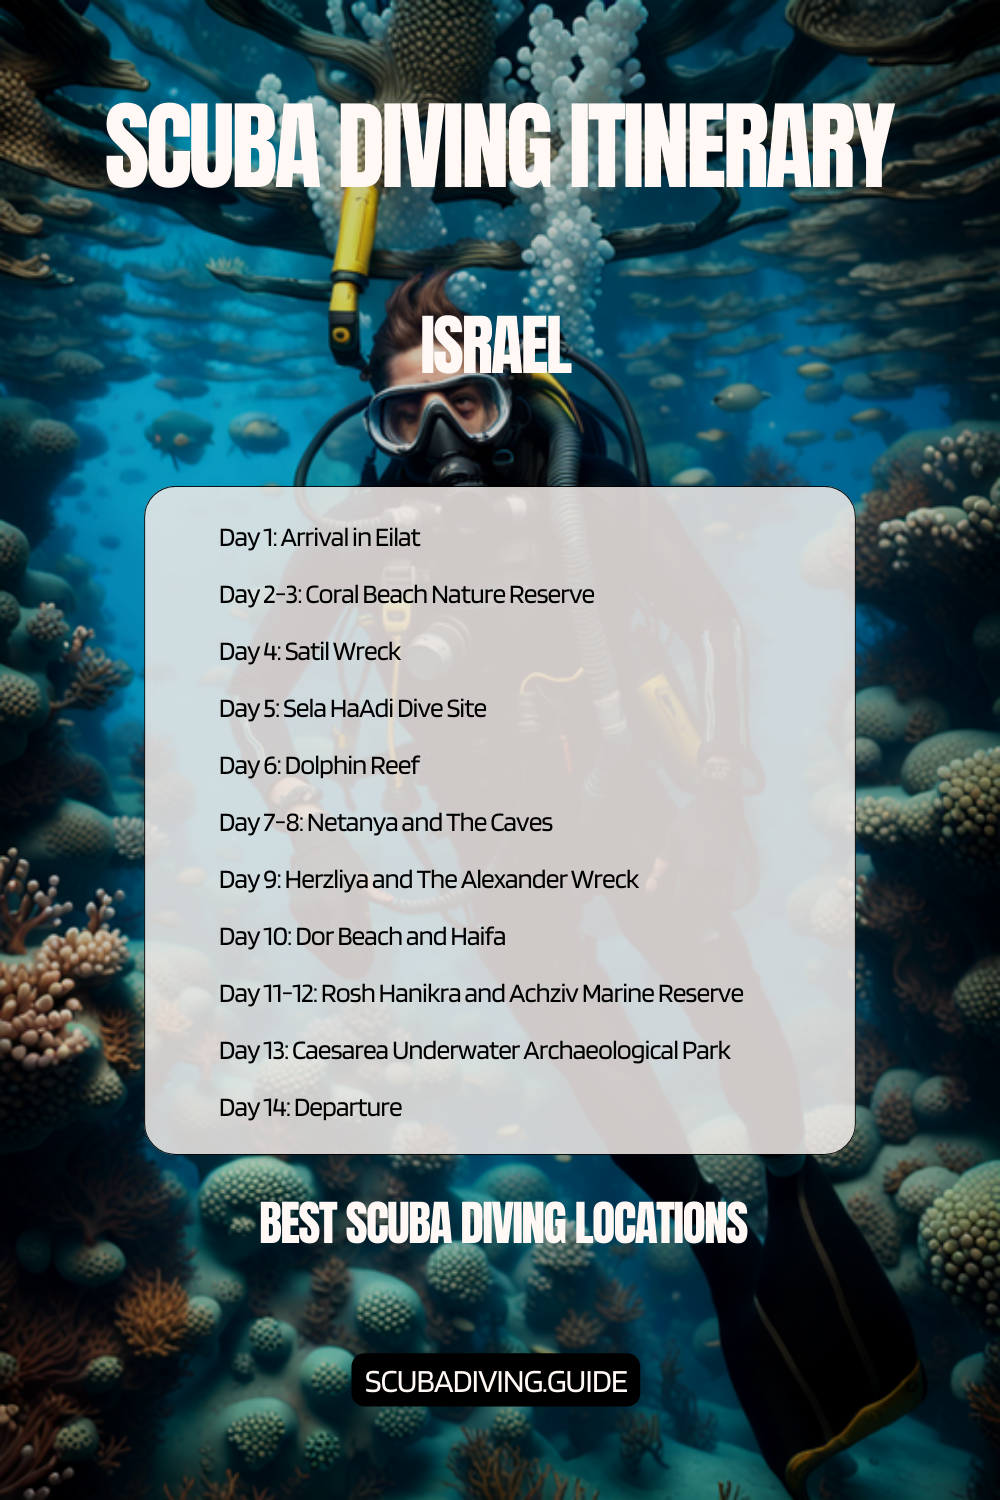 Israel Recommended Scuba Diving Itinerary